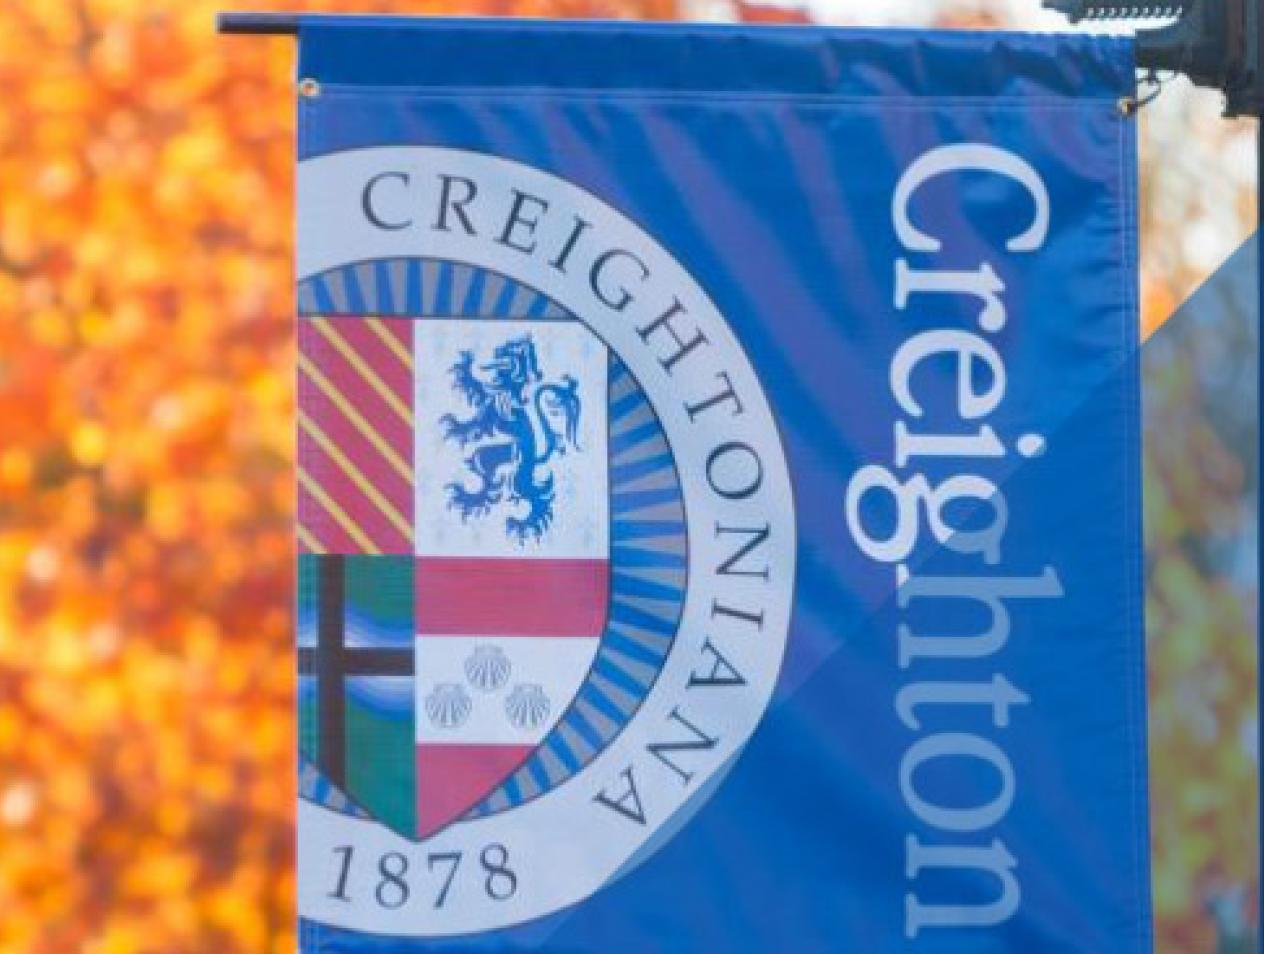 Creighton banner on campus with orange shining leaves on tree branches